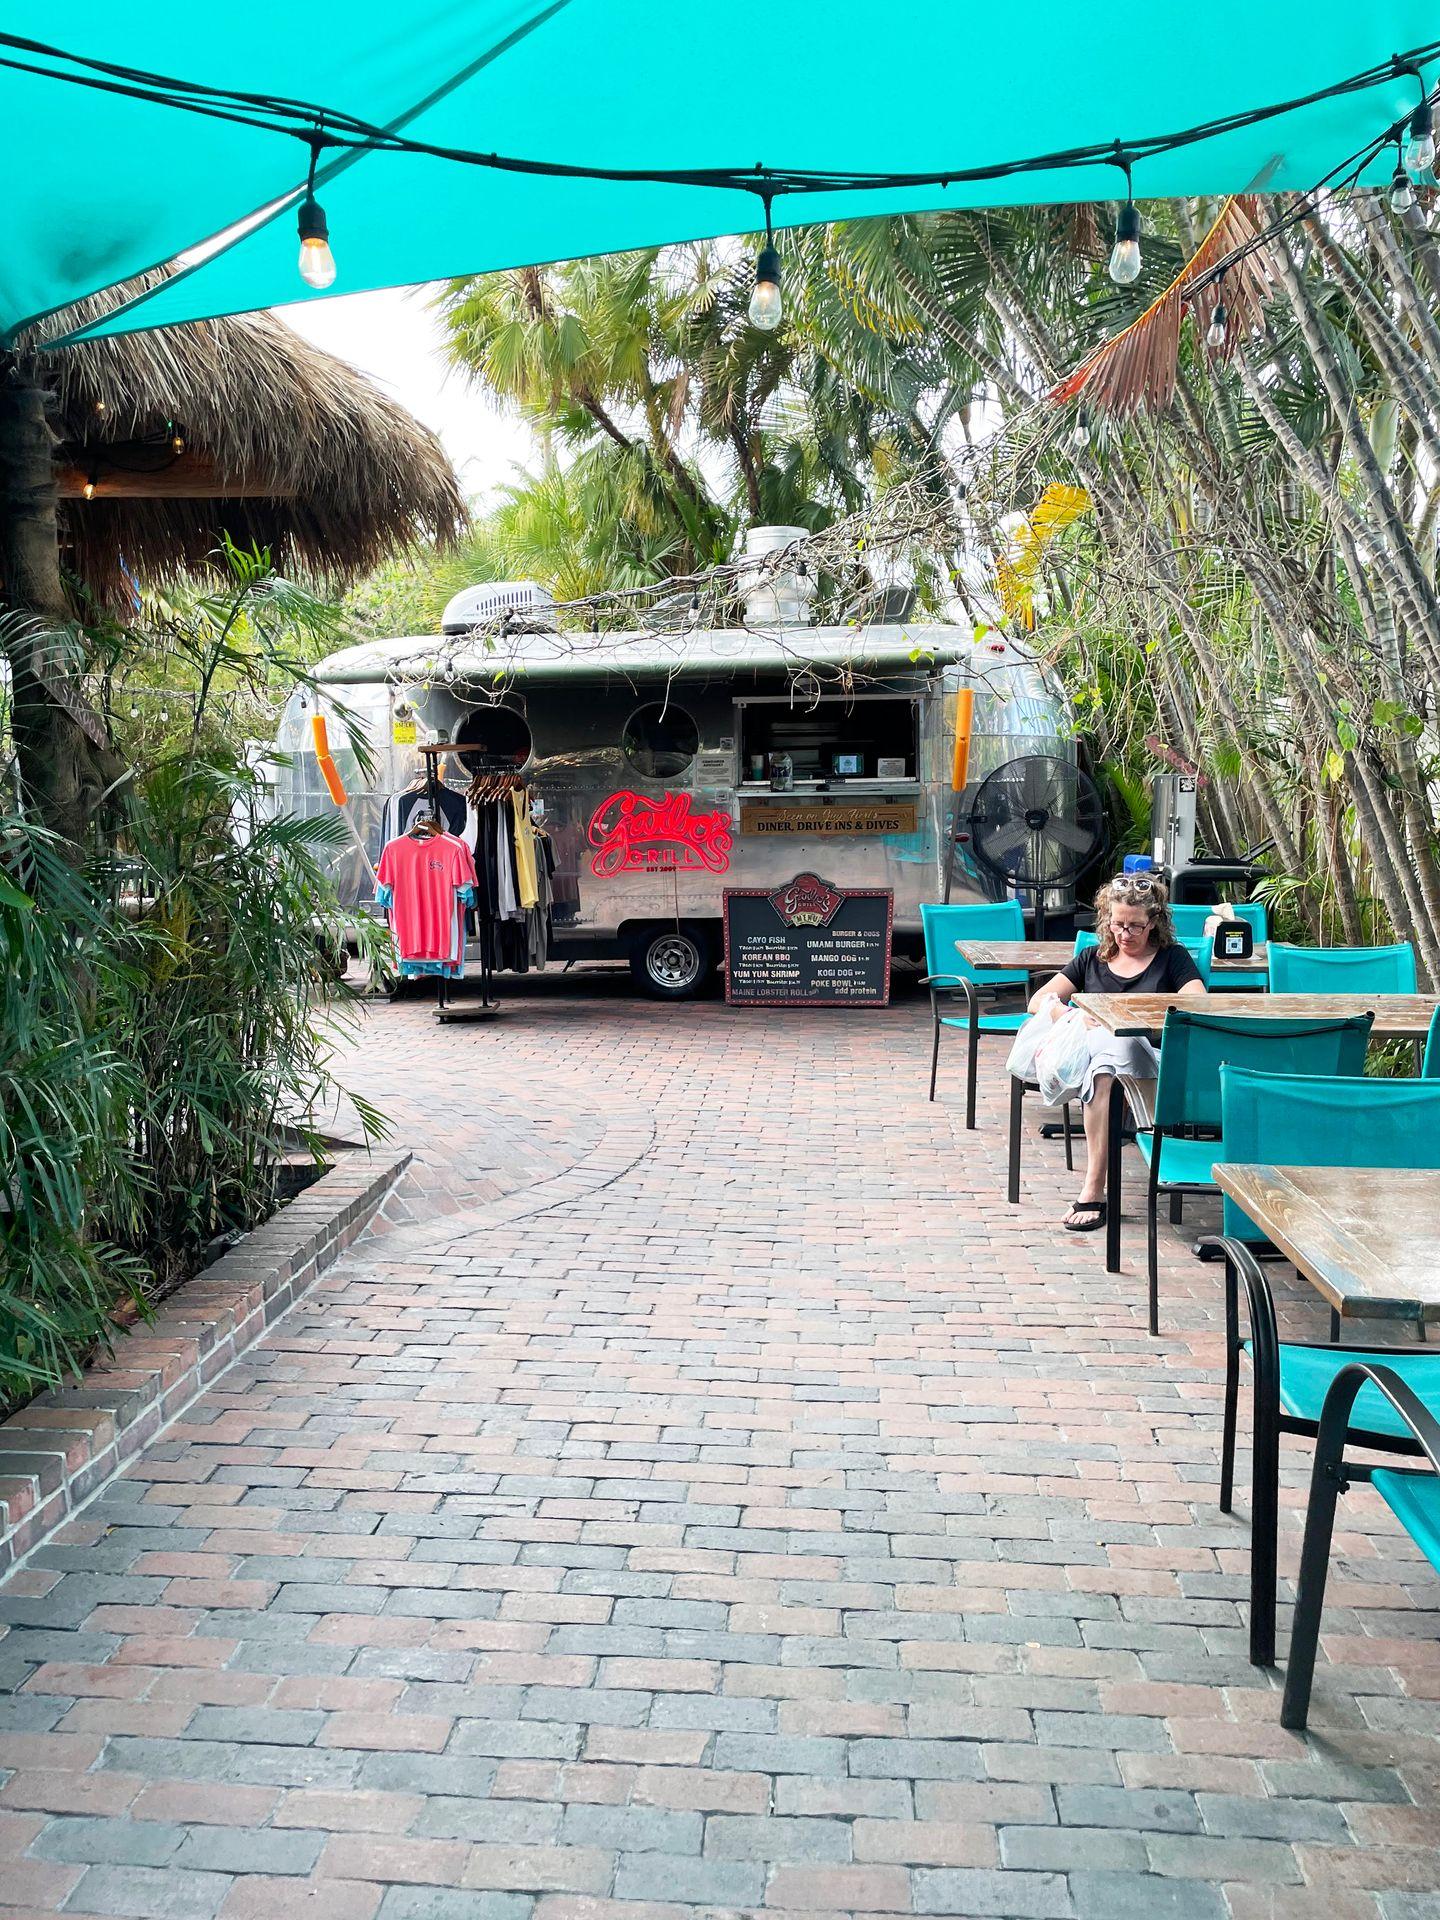 Looking back at a airstream food truck in an outdoor patio area.